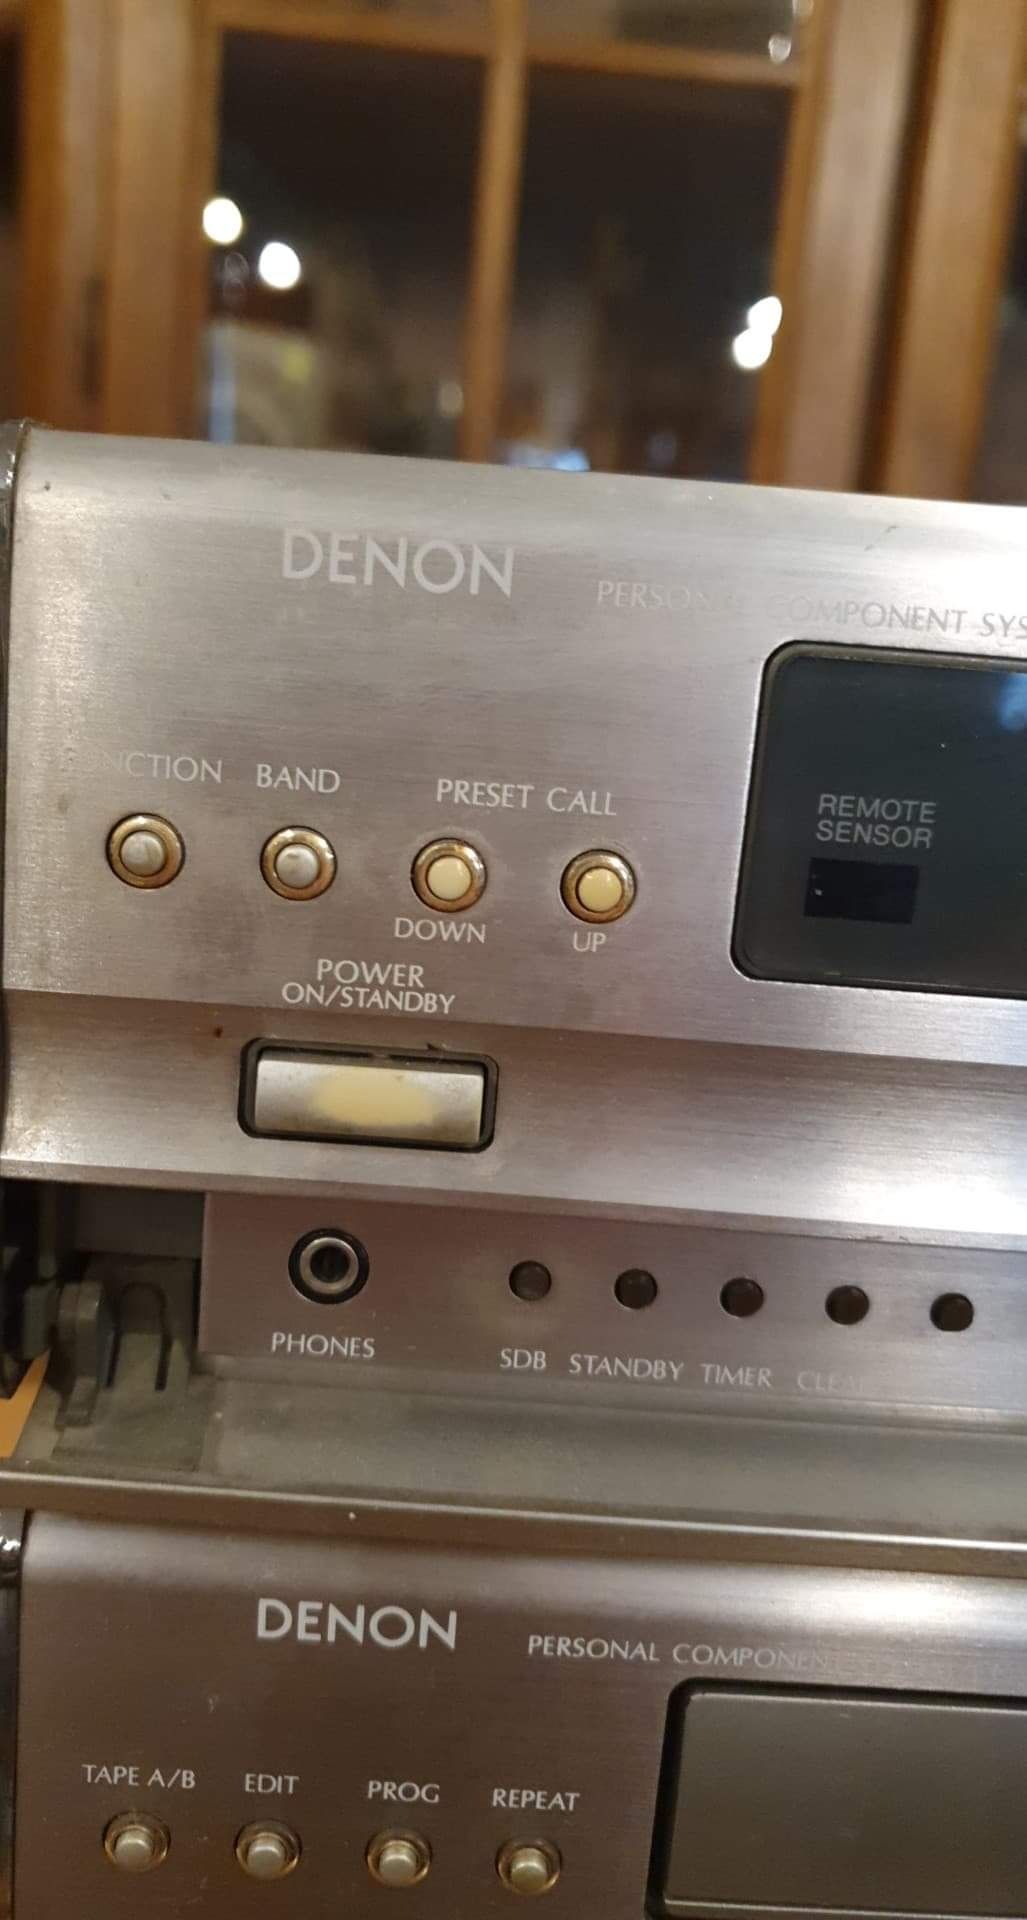 Denon USC 90 wieża personal component system stereo receiver UDRA 90